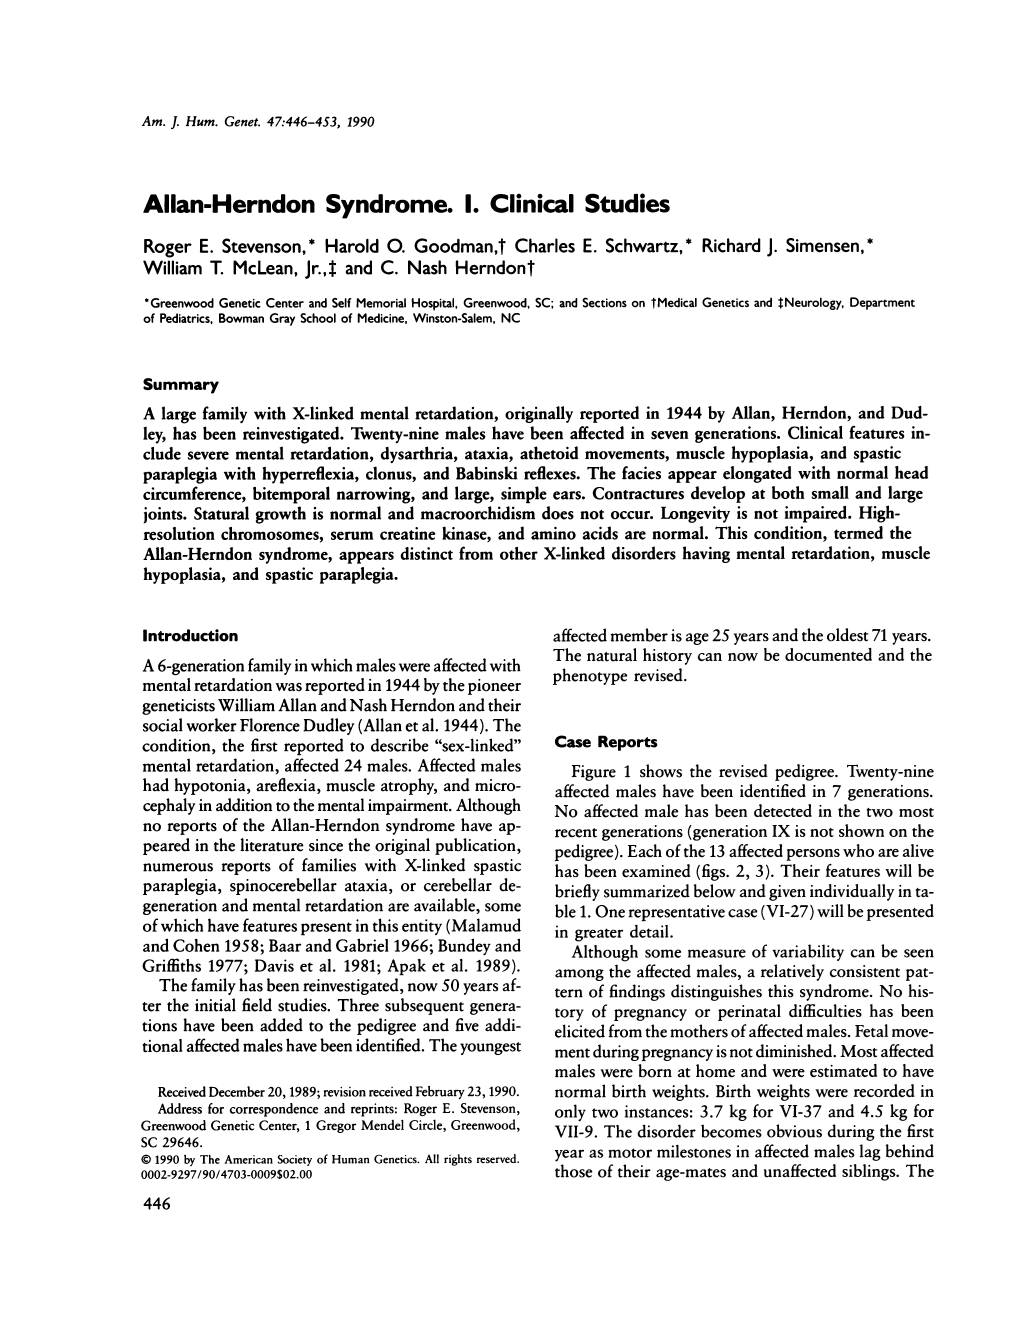 Allan-Herndon Syndrome. 1. Clinical Studies